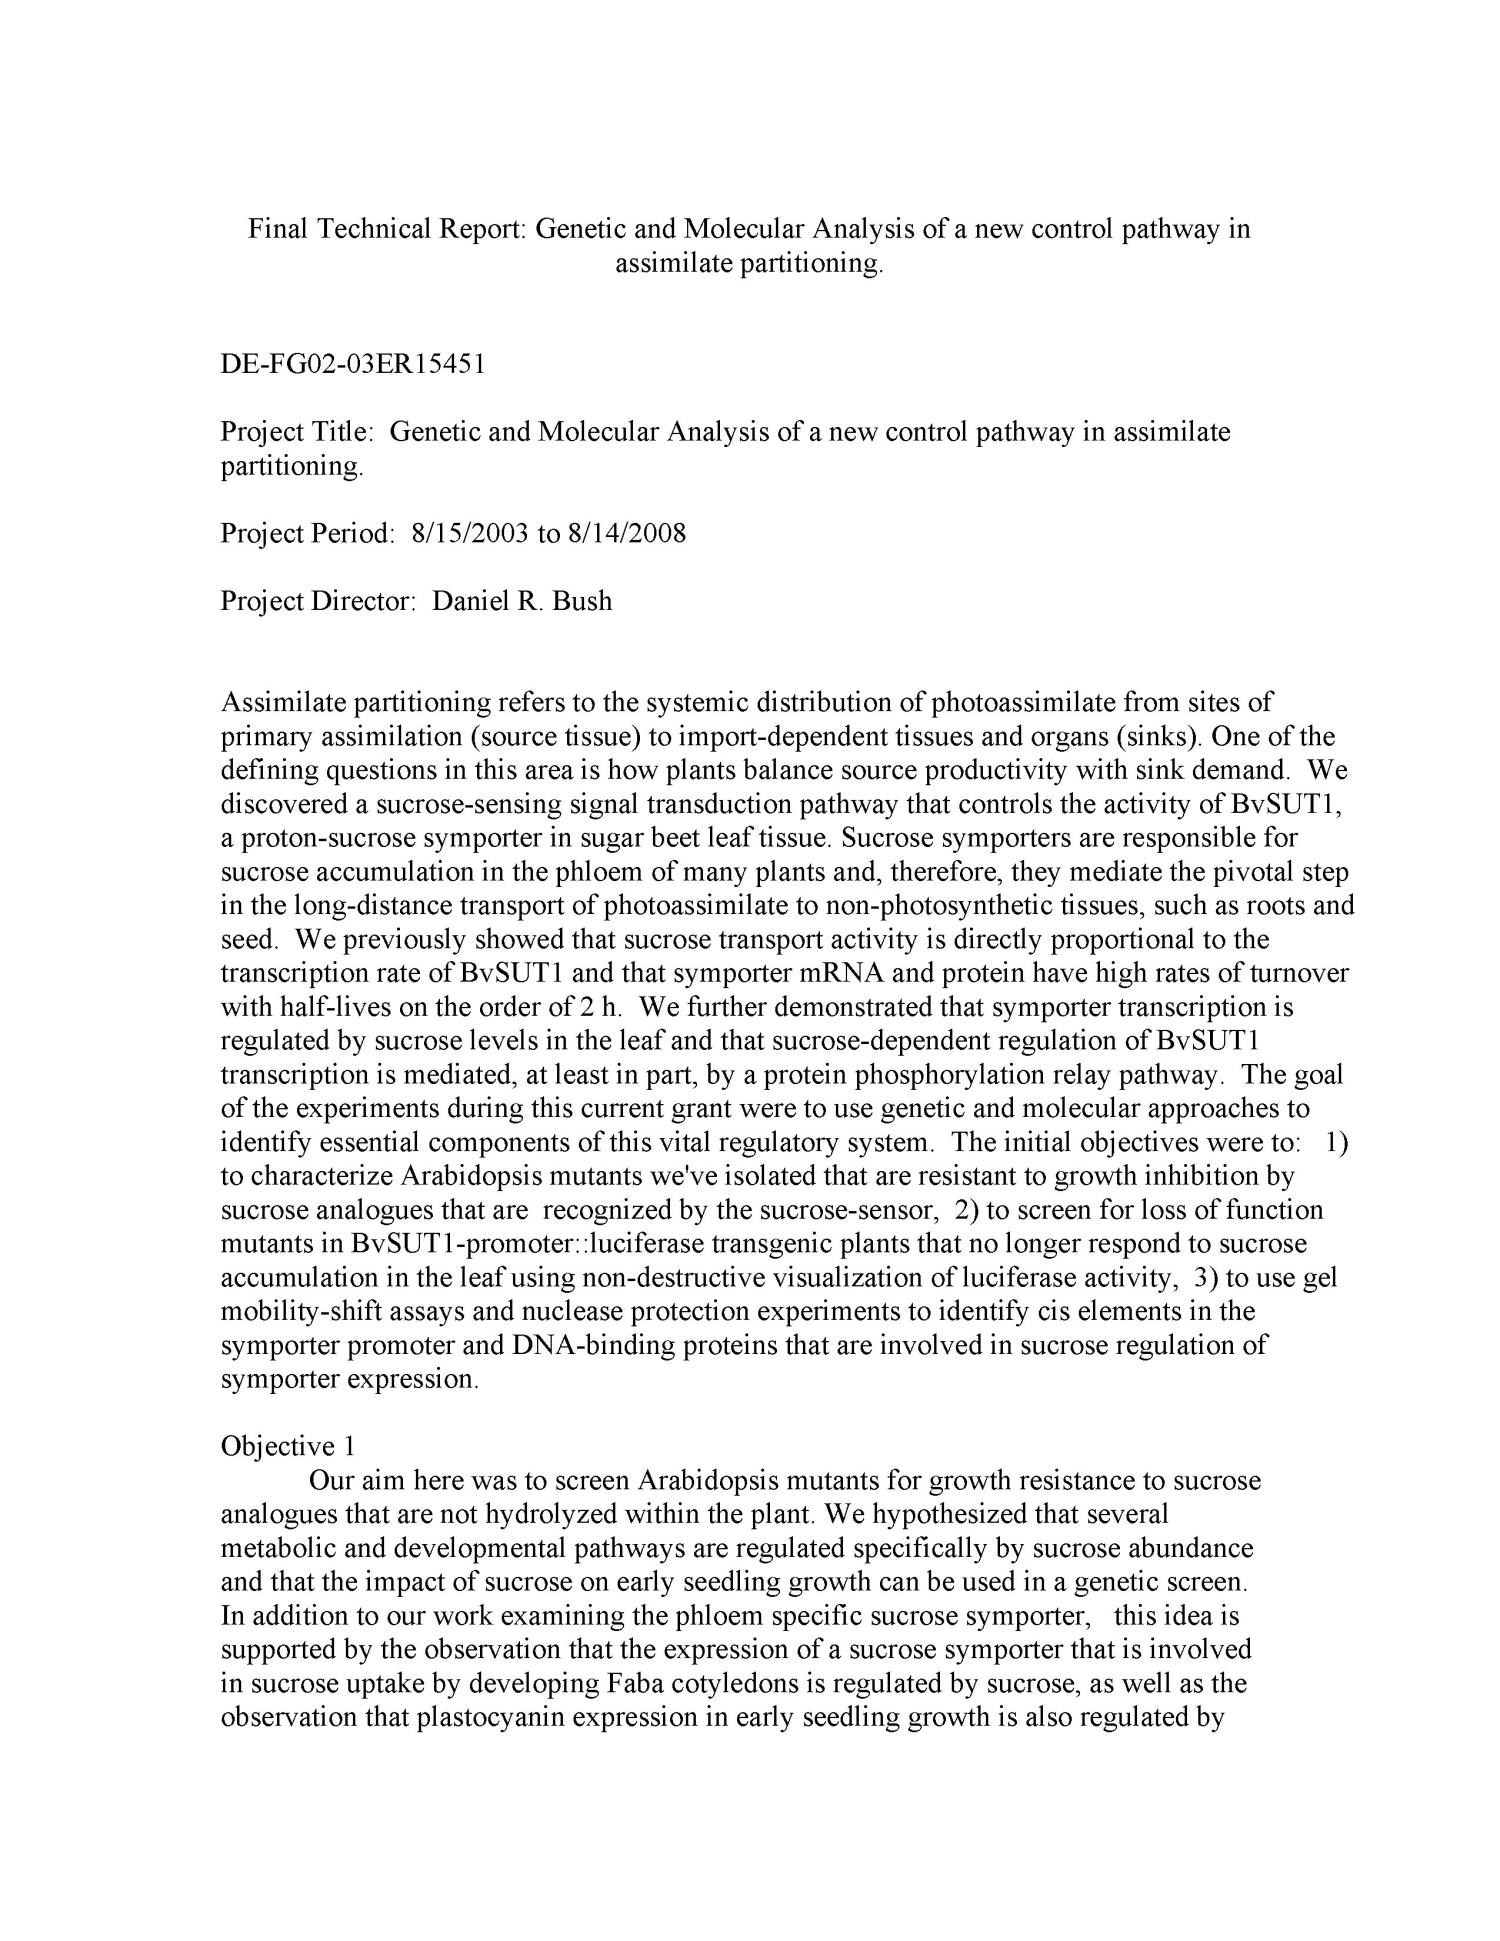 Final Technical Report: Genetic and Molecular Analysis of a new control ...